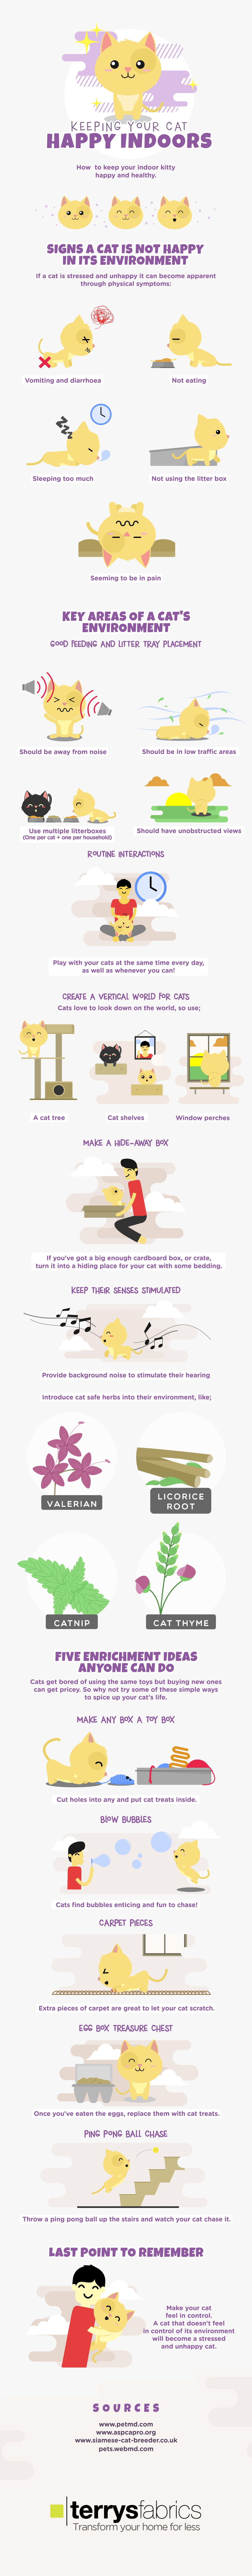 Keeping Your Cat Happy Indoors